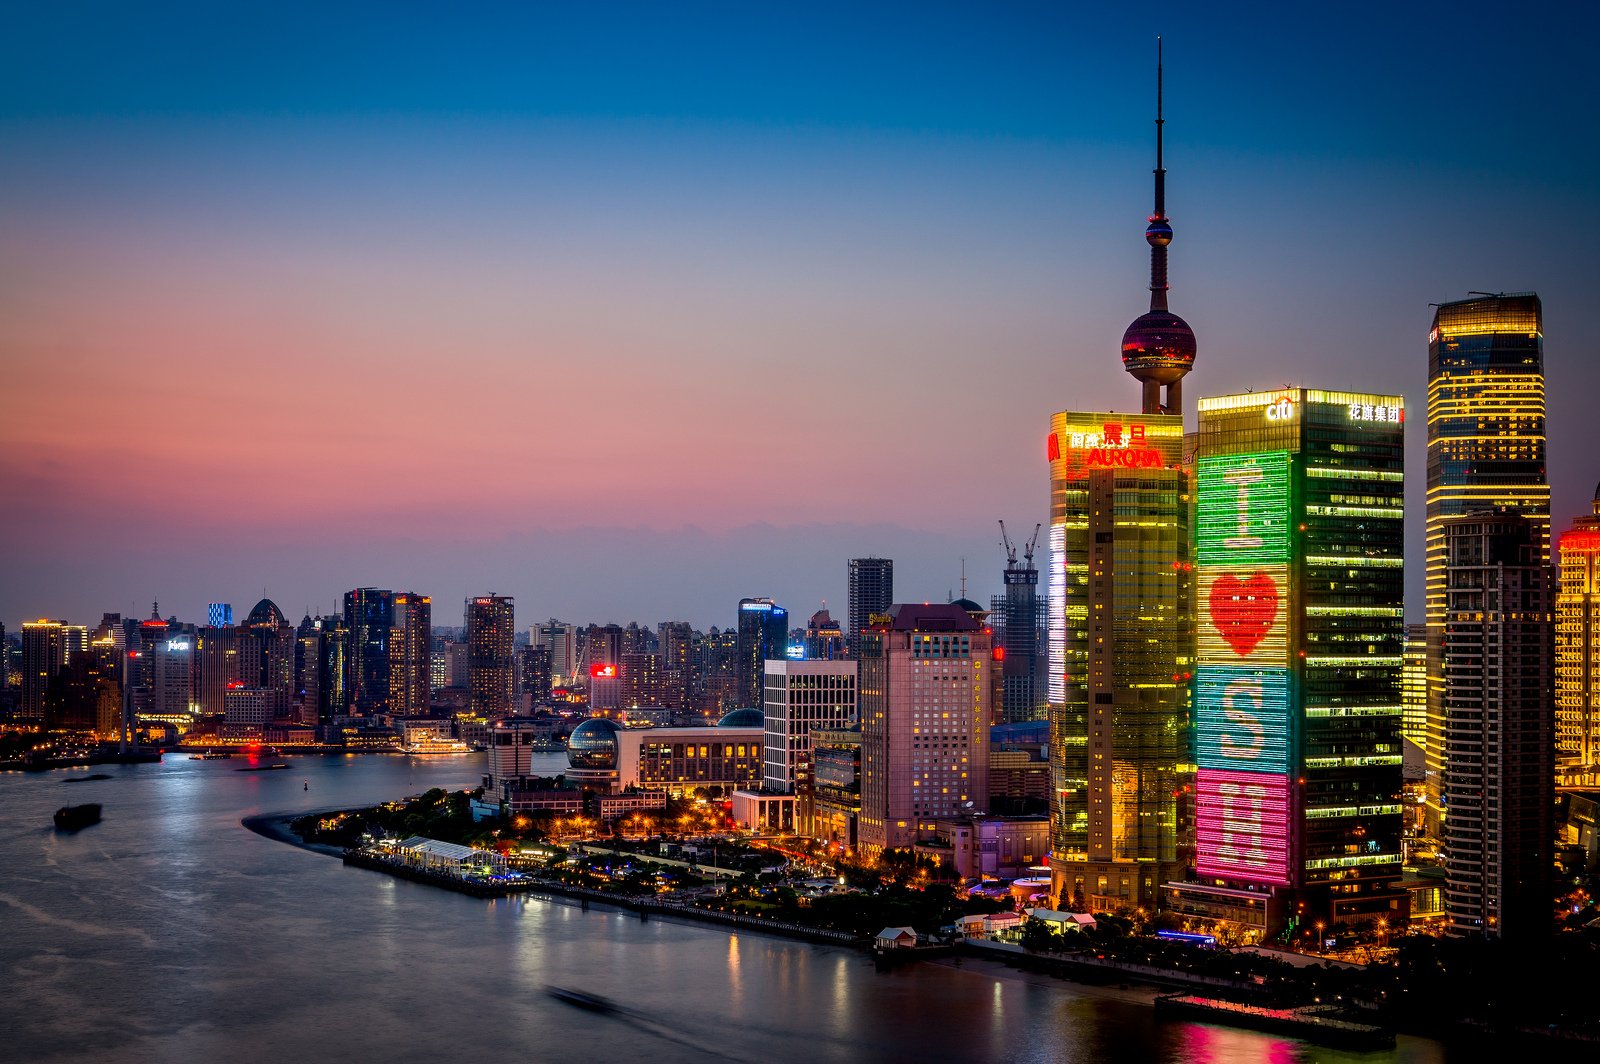 architecture, Asia, Asian, Asians, Chine, China, Buildings, Cities, Citylifes, Cityscapes, Light, Night, Skyline, Skylines, Skyscrapers, Bridges, Highways, Shanghai Wallpaper